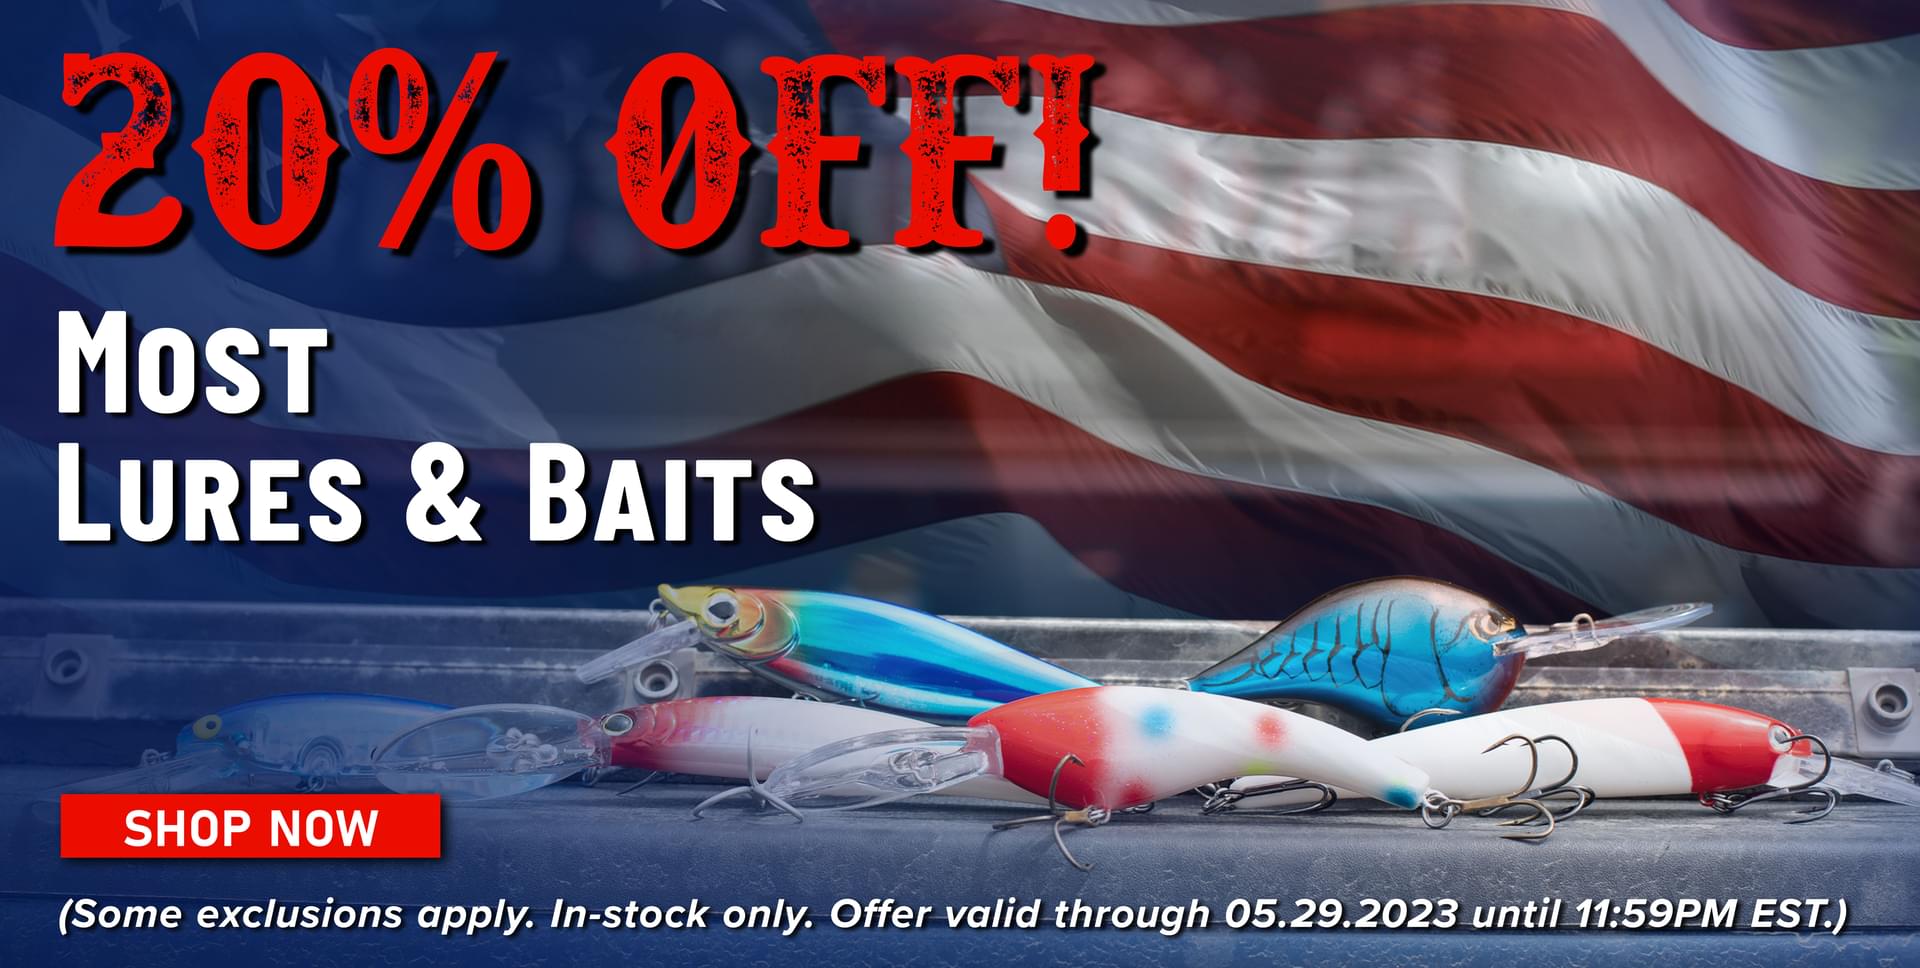 20% Off! Most Lures & Baits  Shop Now (Some exclusions apply. In-stock only. Offer valid through 05.30.2023 until 11:59PM EST.)